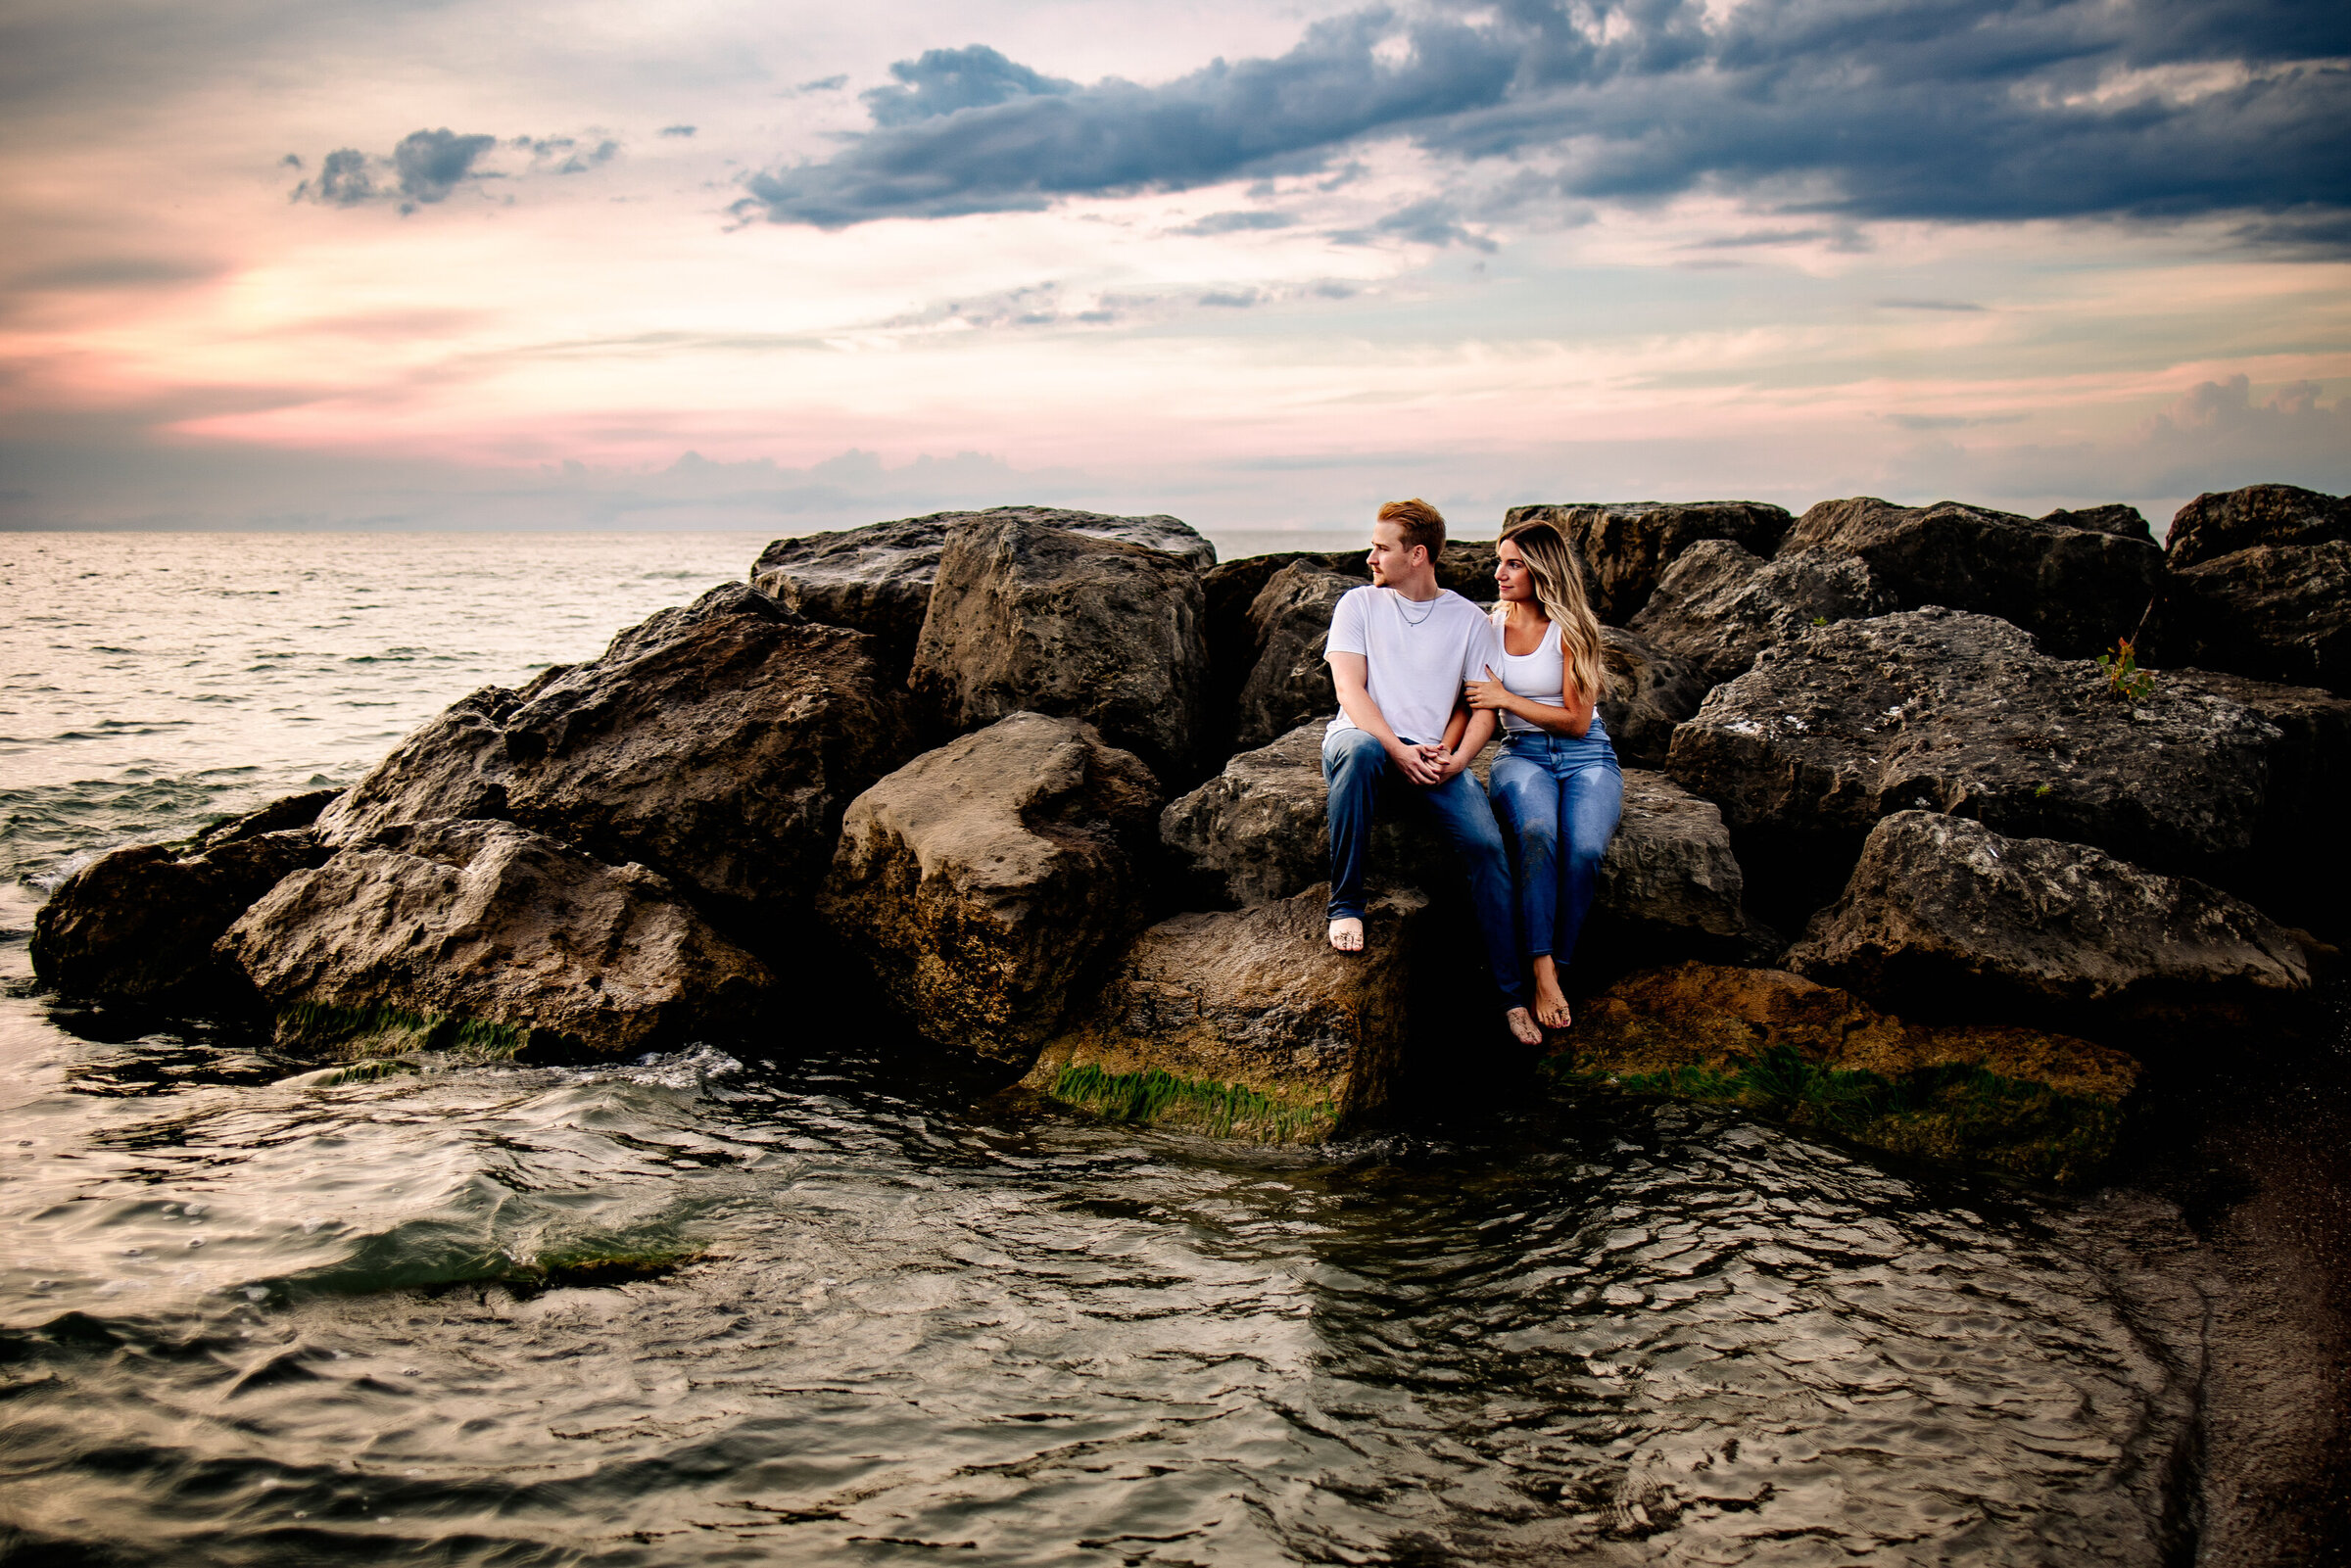 Couple sits together holding hands amongst a pile of large boulders Erie, PA